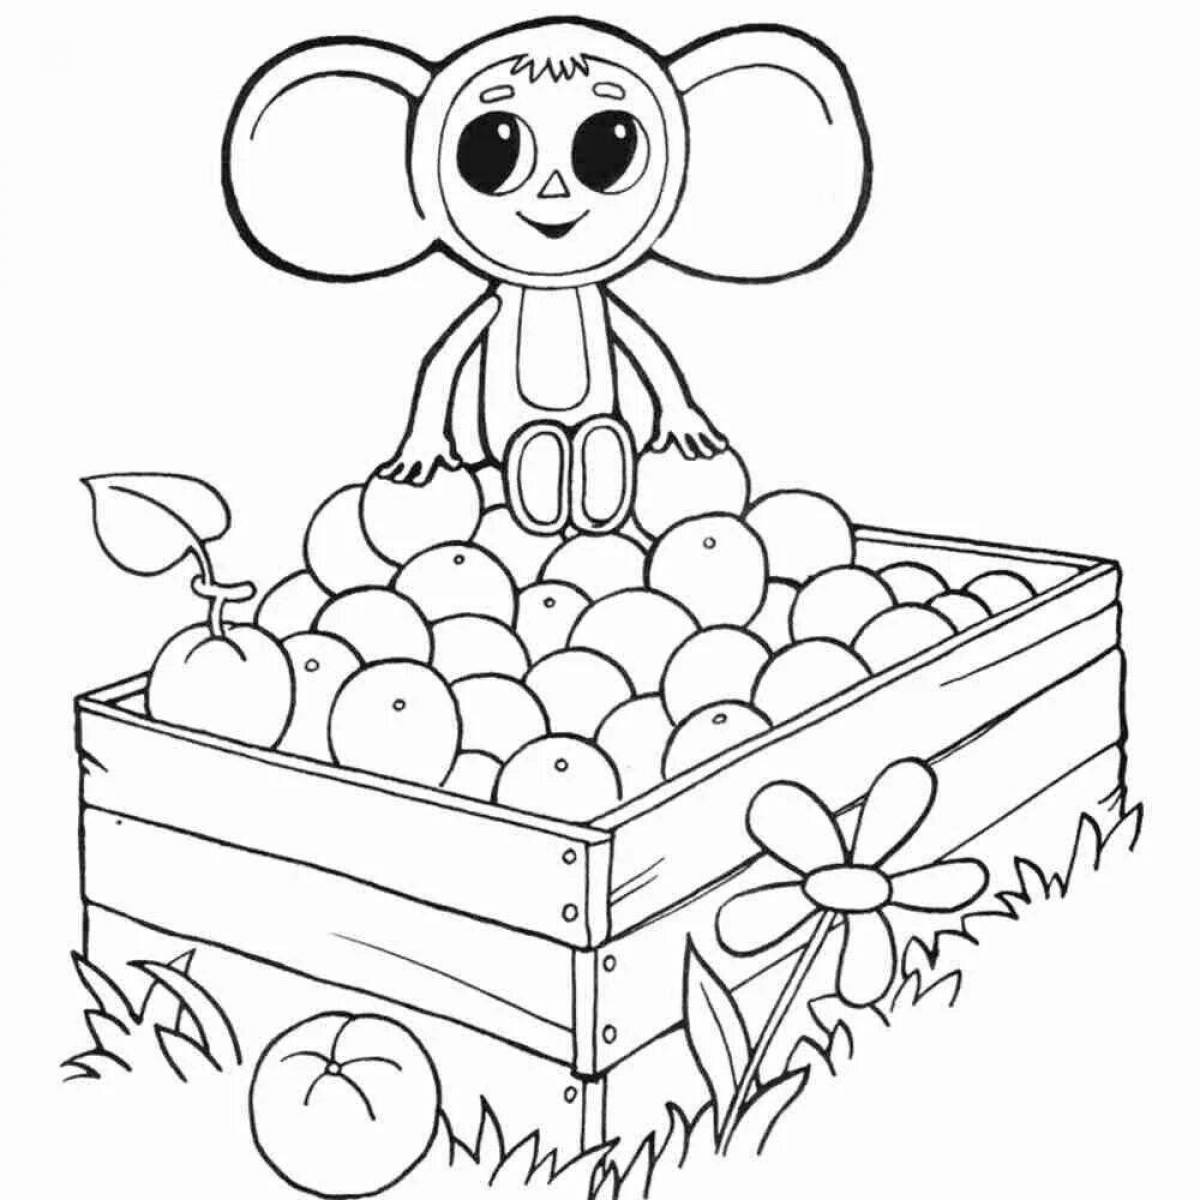 Attractive Cheburashka coloring book for children 6-7 years old